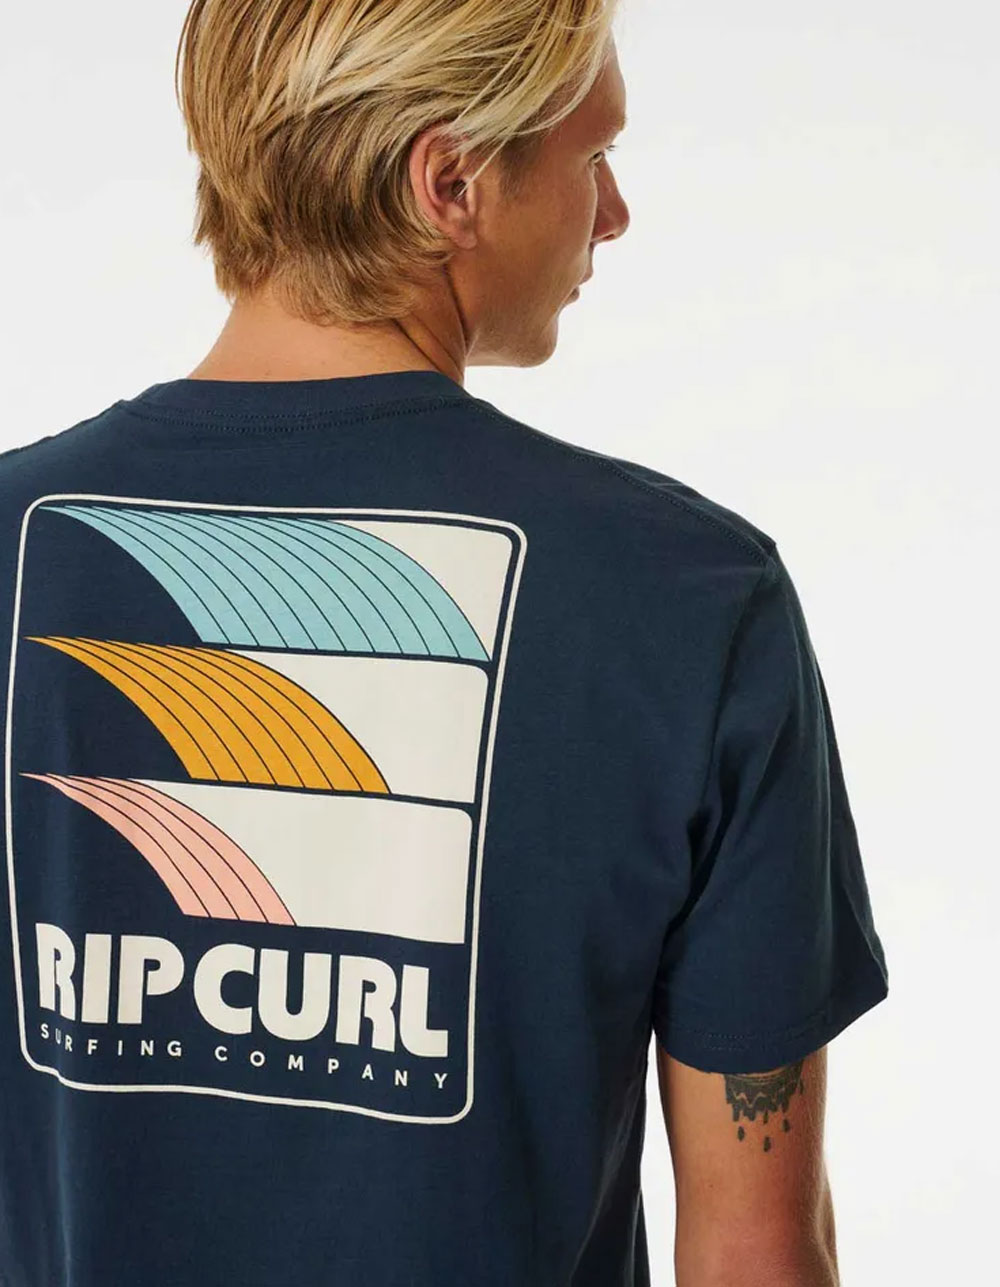 Rip Curl Wet Suits - STICKERS  Rip curl, Surfing, Graphic design company